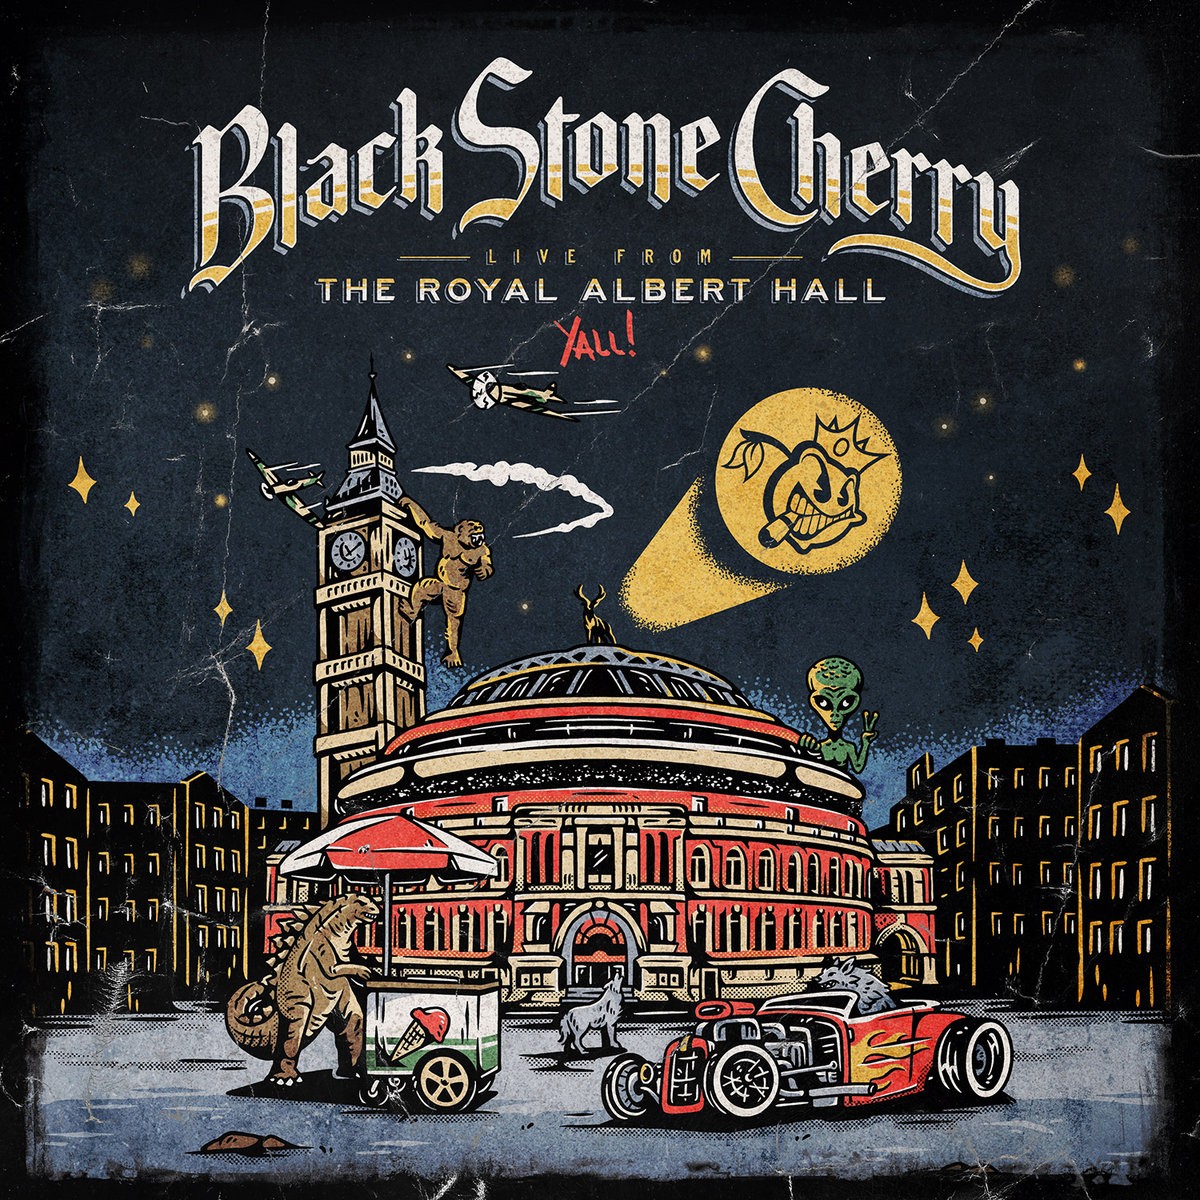 Black Stone Cherry - Live From The Royal Albert Hall​.​.​. Y'All